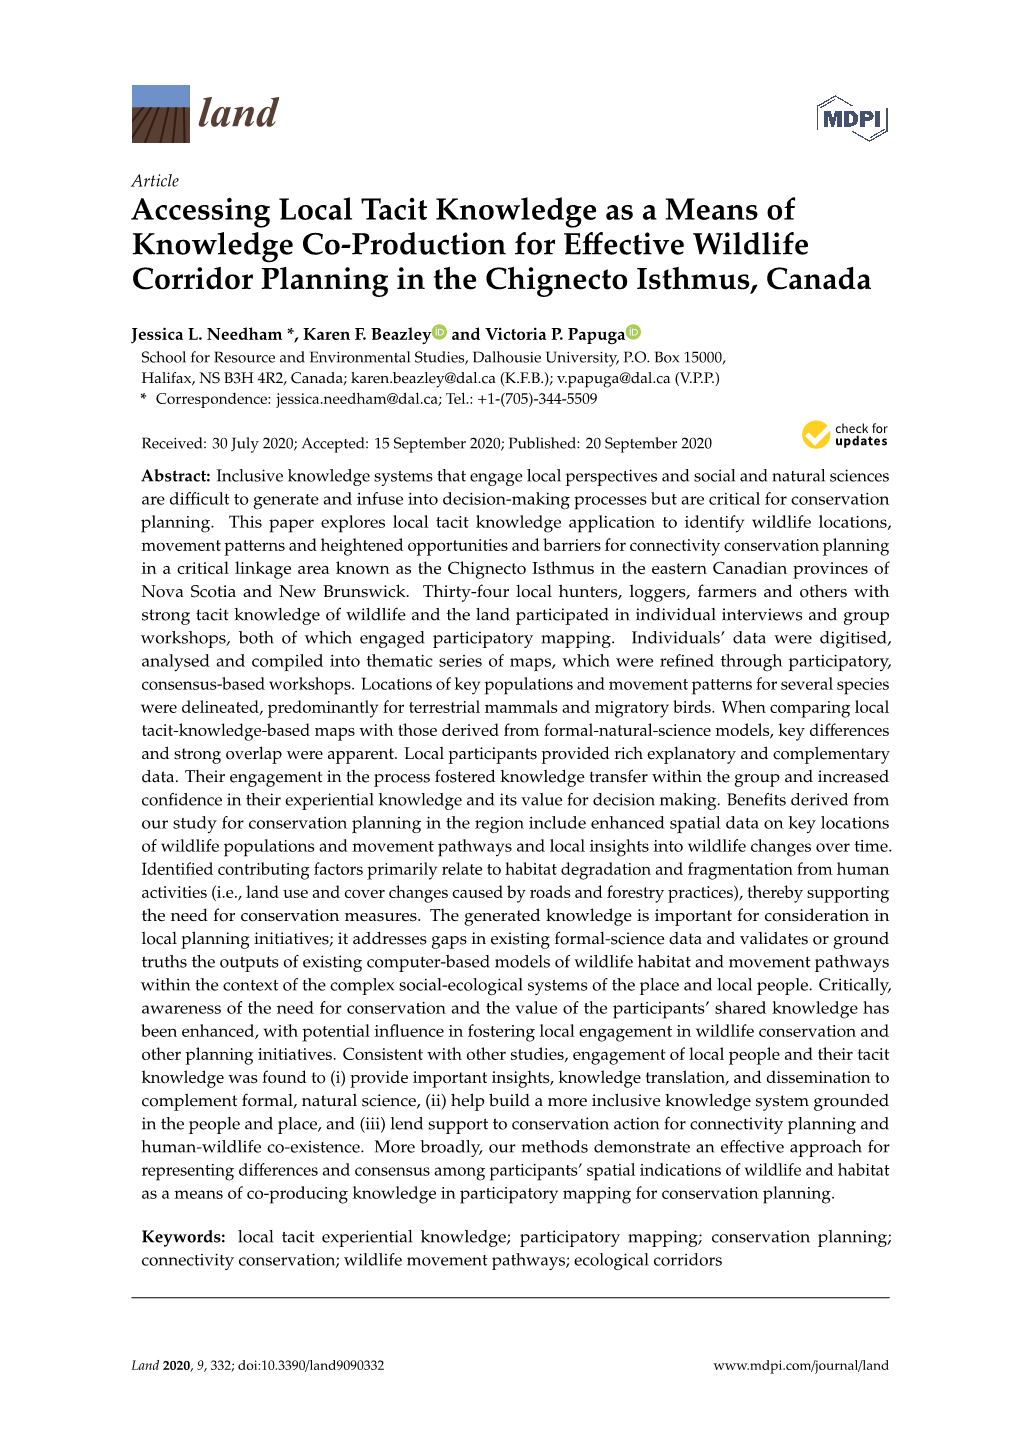 Accessing Local Tacit Knowledge As a Means of Knowledge Co-Production for Eﬀective Wildlife Corridor Planning in the Chignecto Isthmus, Canada